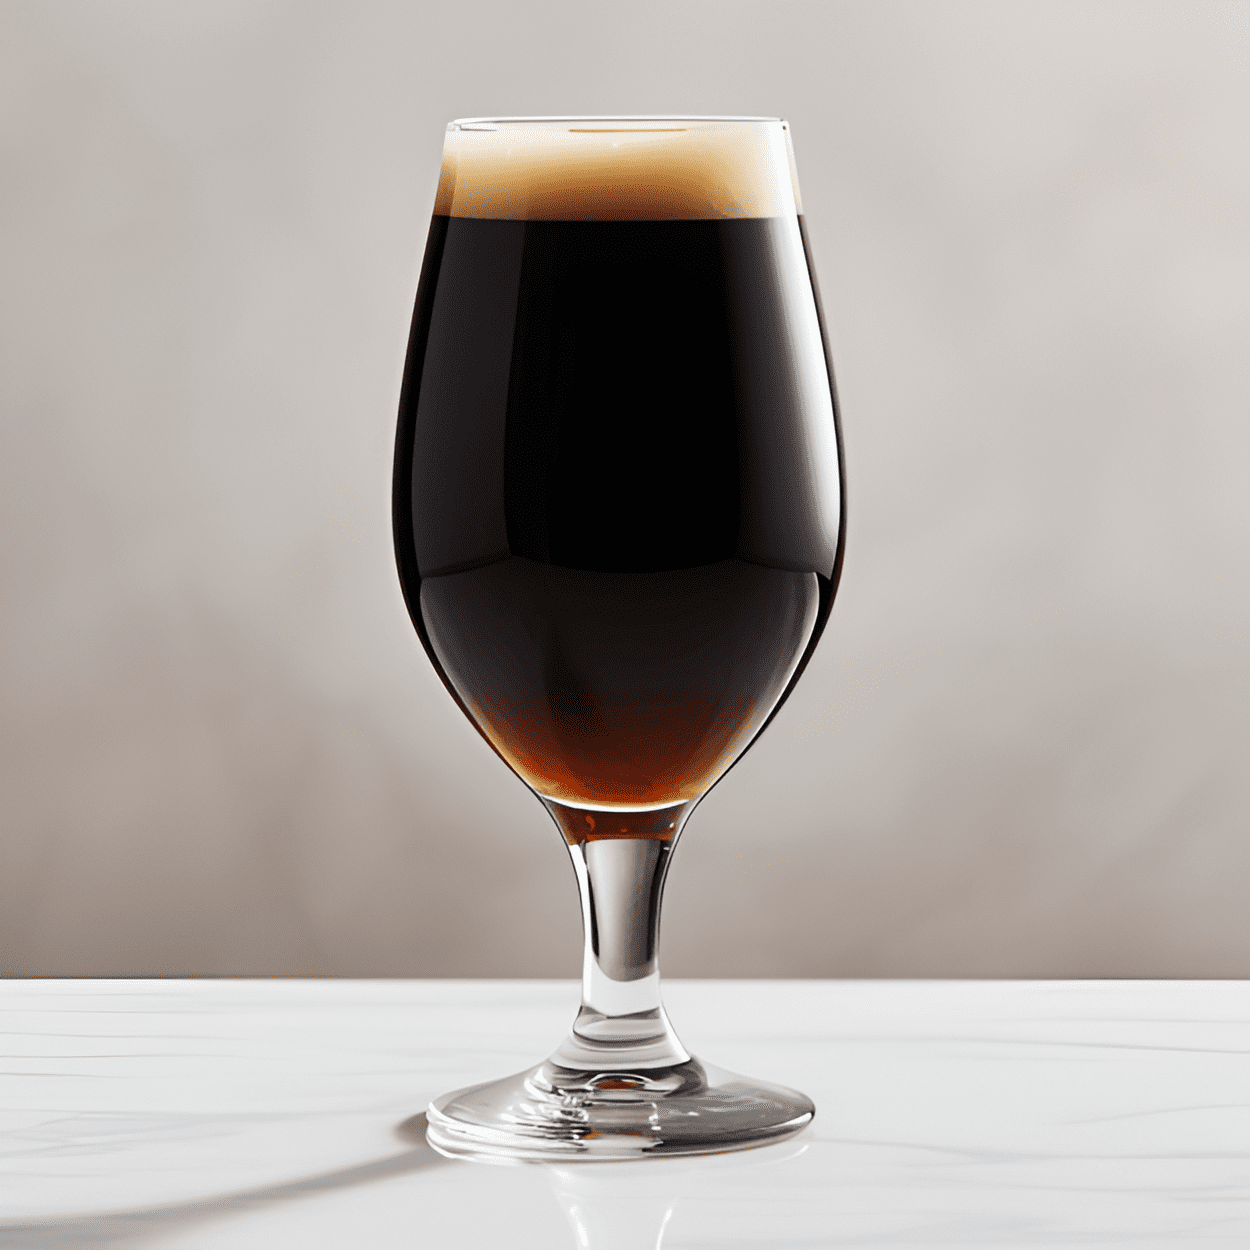 The Black And Tan cocktail is a delightful mix of flavors. The stout brings a rich, creamy, and slightly bitter taste, while the ale adds a crisp, refreshing, and slightly sweet note. The result is a balanced, full-bodied drink with a smooth finish.